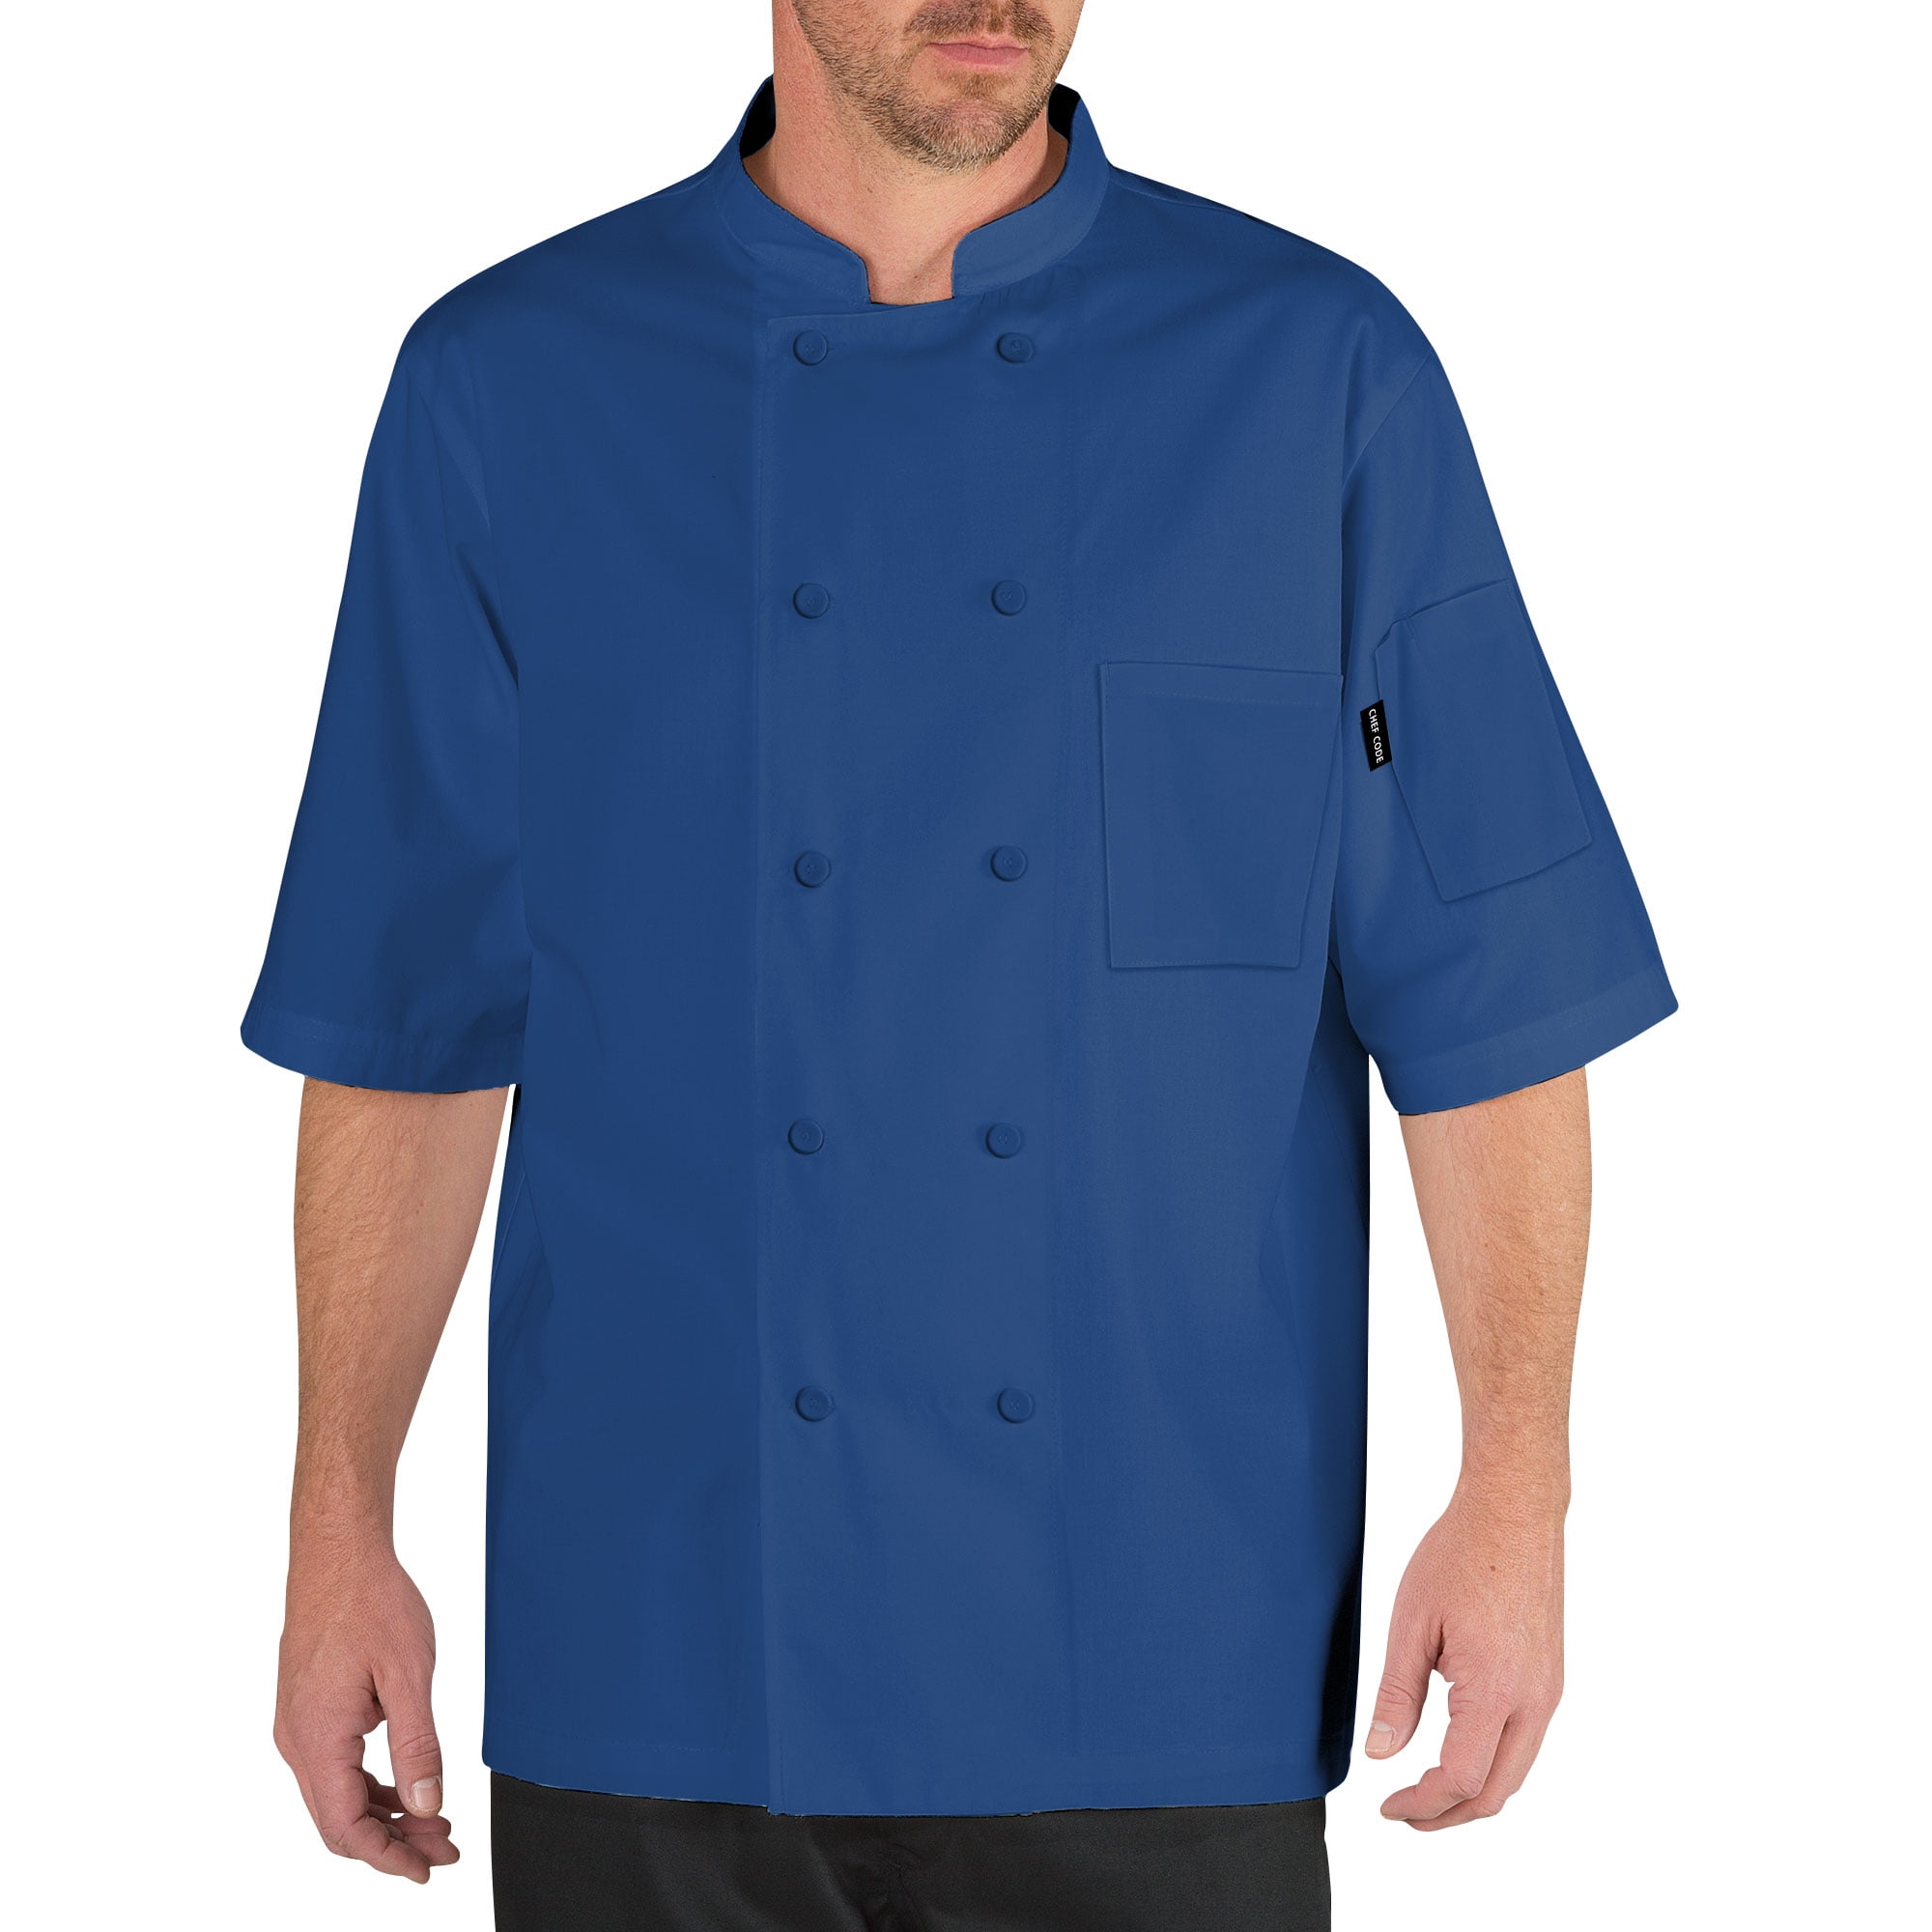 UNISEX CHEFS JACKET CLOTHING/APRONS PRESS STUD BUTTONS,HALF SLEEVE NEW INS07 